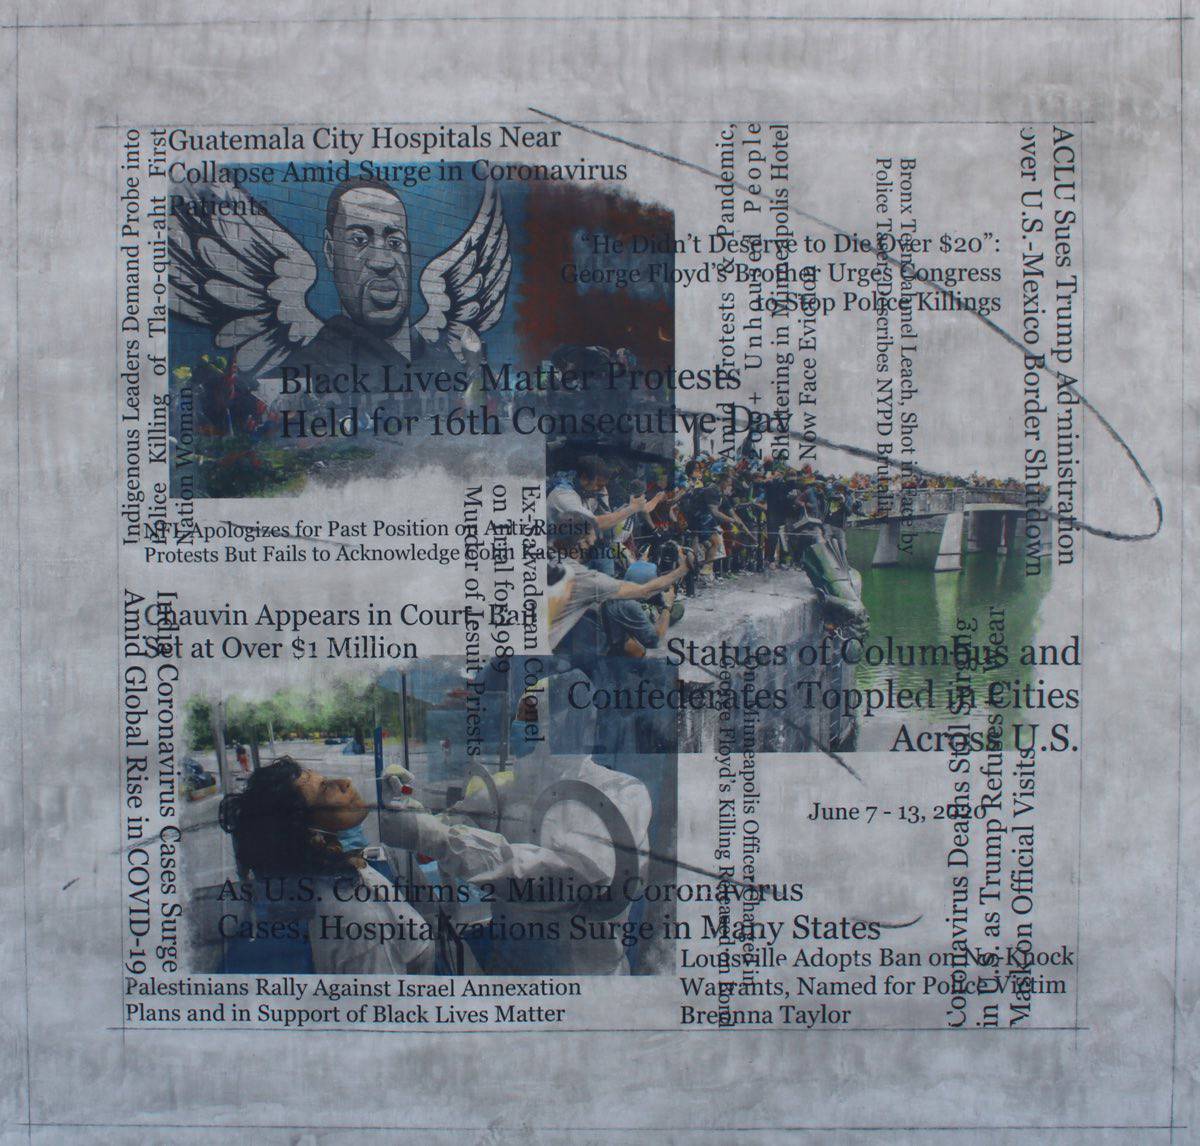 Acrylic and collage painting of news headlines and hand-painted images from the news media.